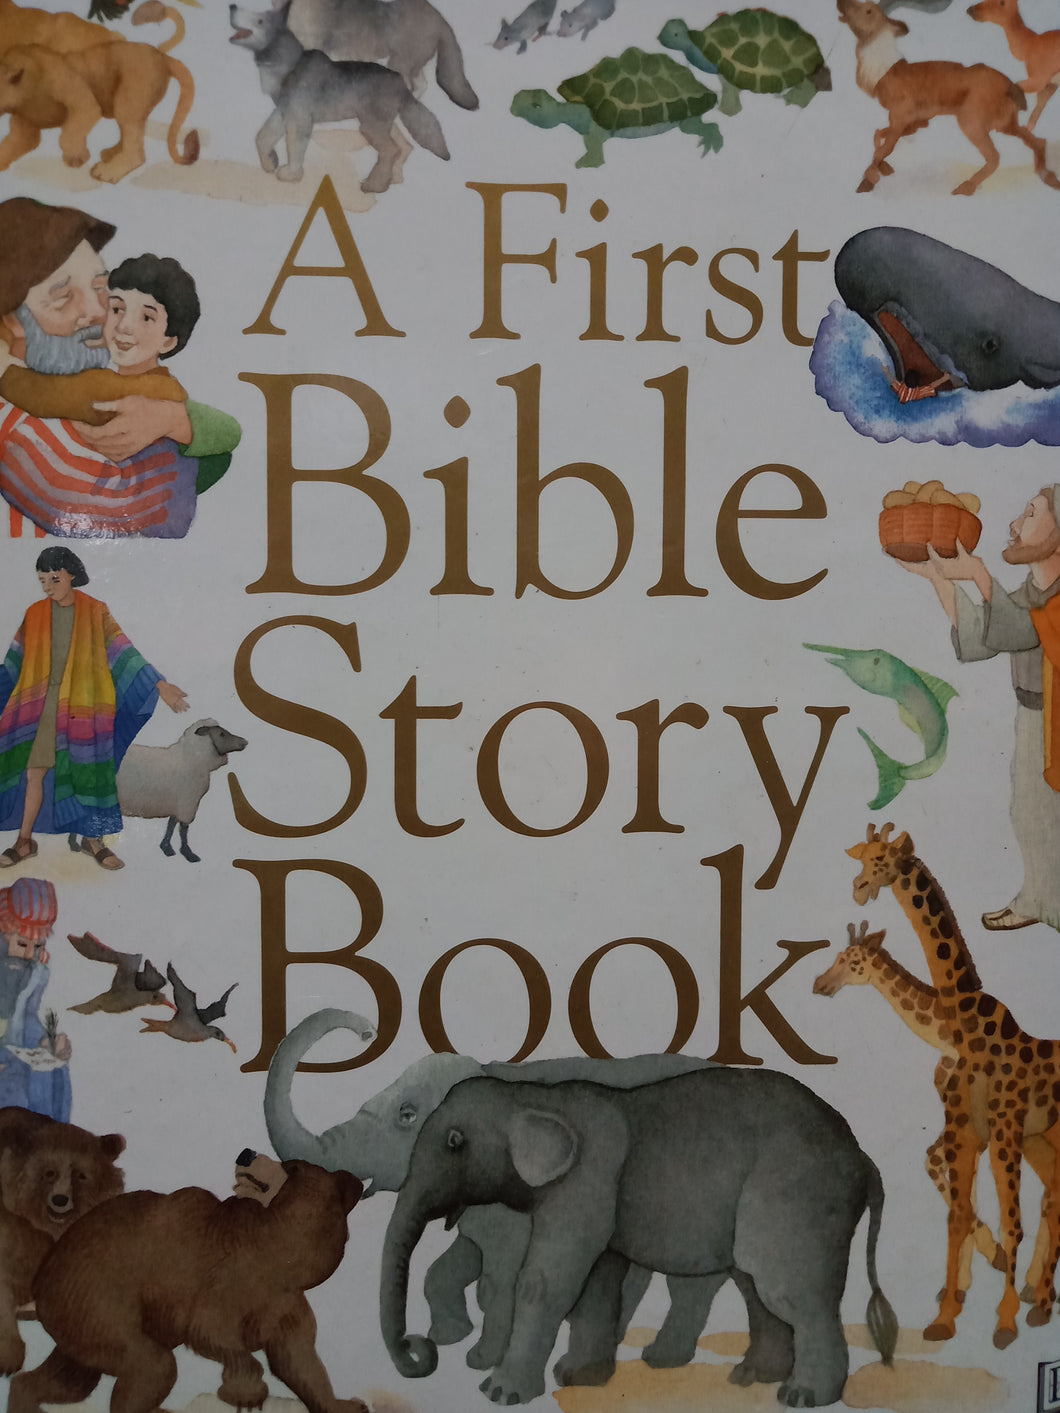 A First Bible Story Book by Julie Downing